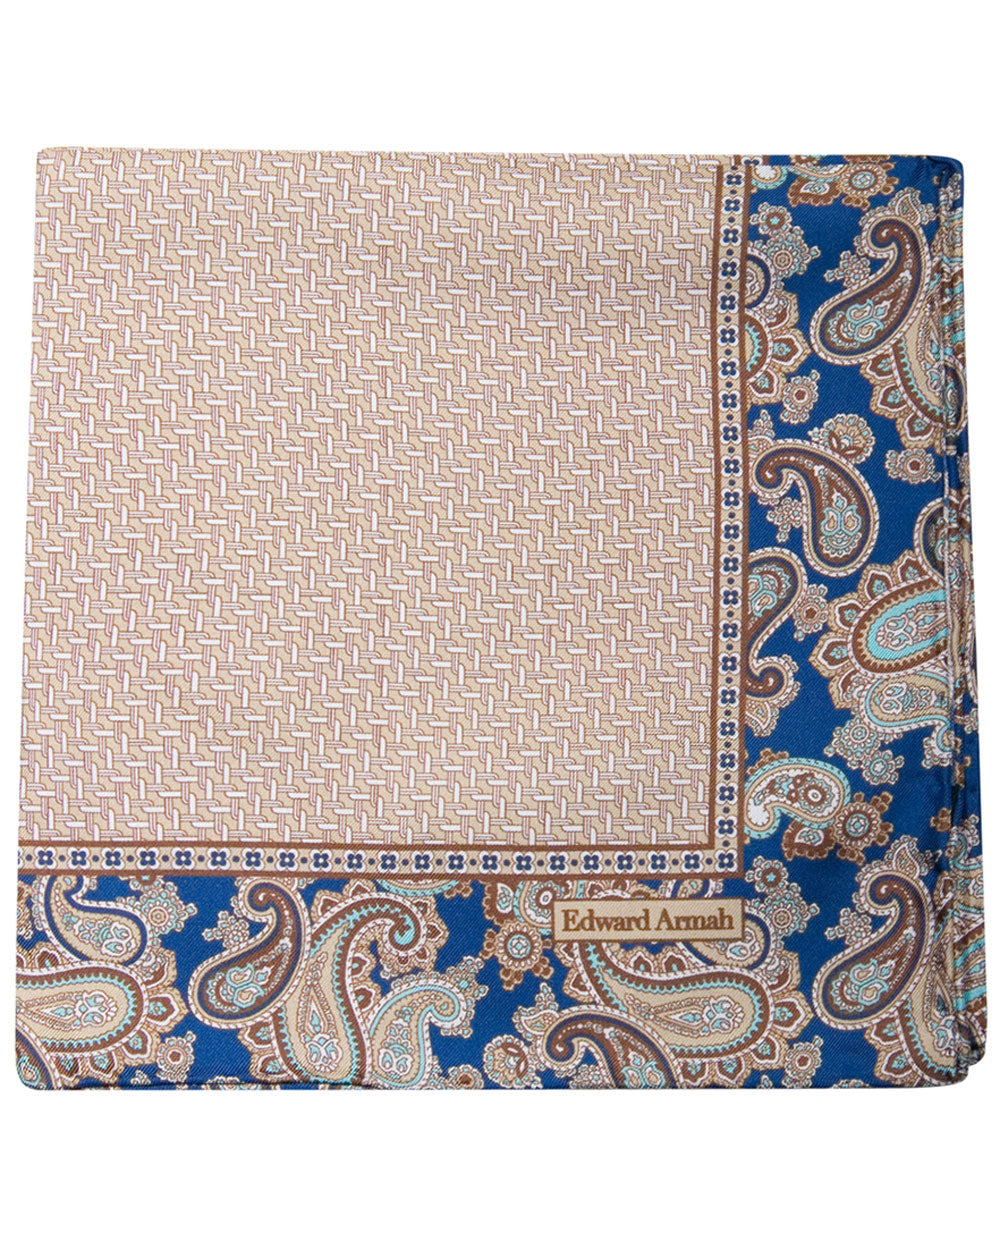 Paisley Pines Pocket Square in Brown and Navy